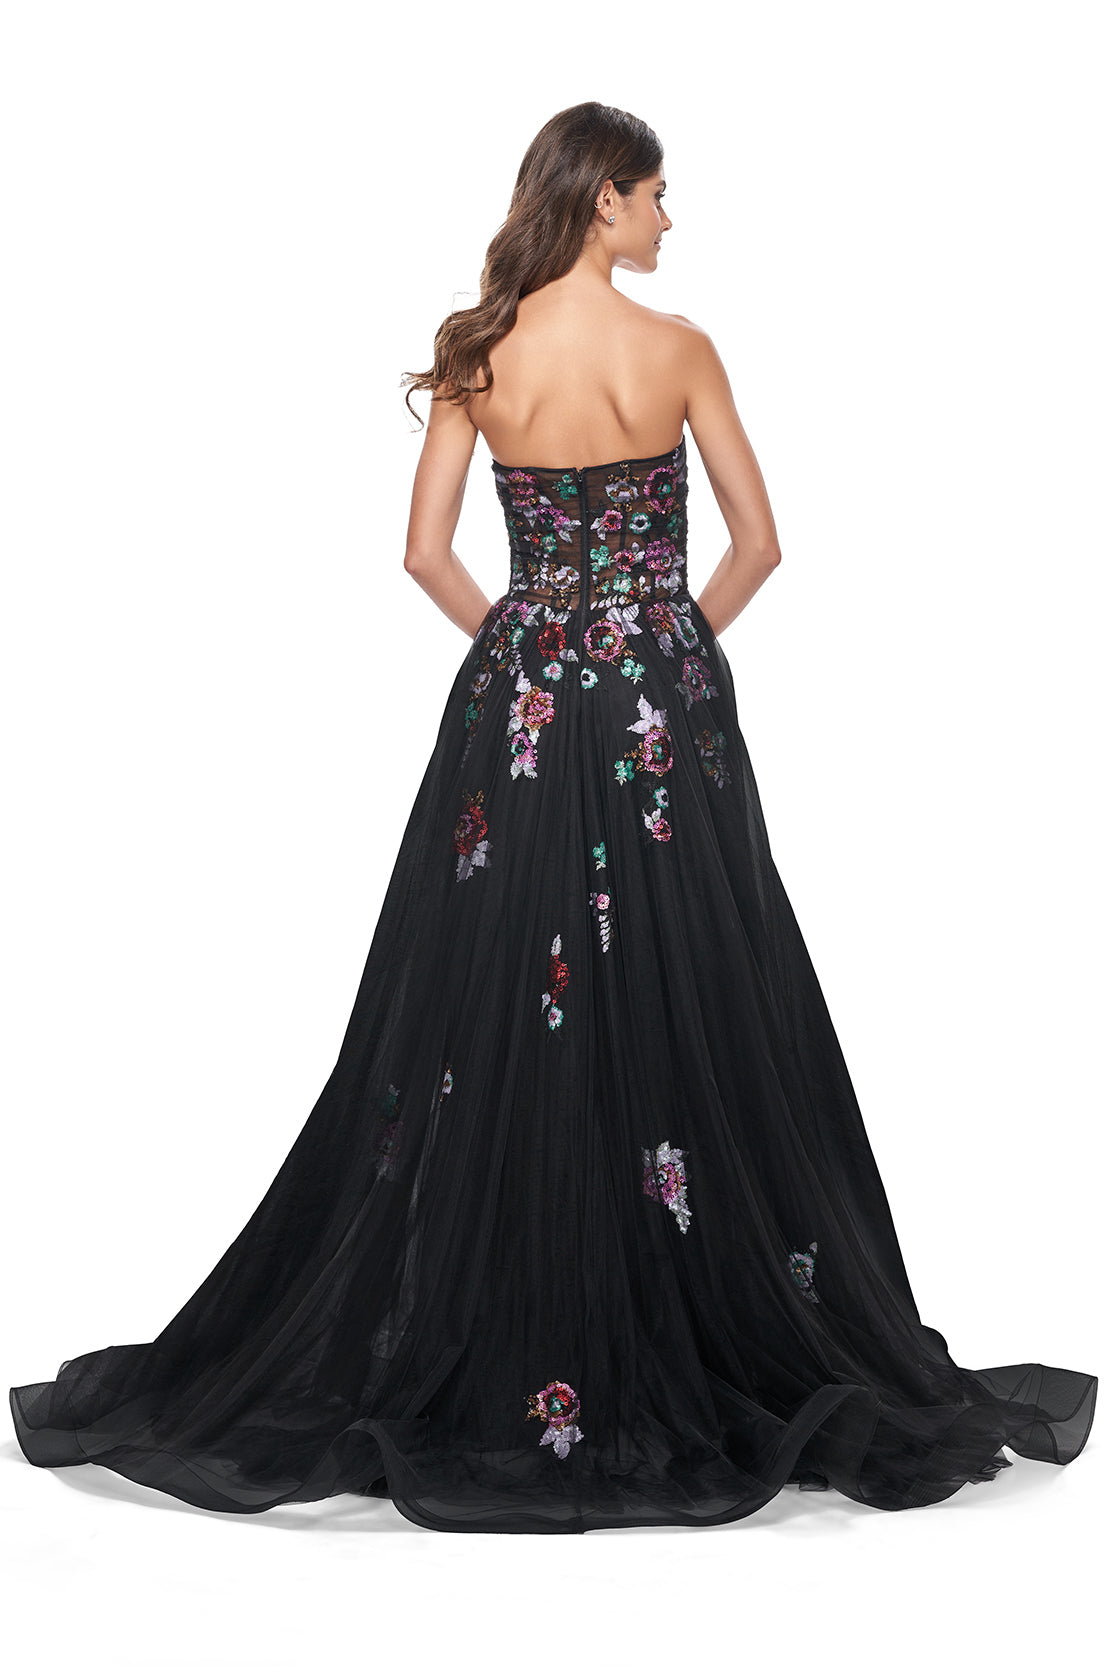 La Femme 32072 Strapless Multi-Color Lace Evening Gown - A stunning A-line gown with multi-color lace floral embellishment, a layer of tulle over the print, and an illusion bodice with exposed boning for a vibrant and stylish look.